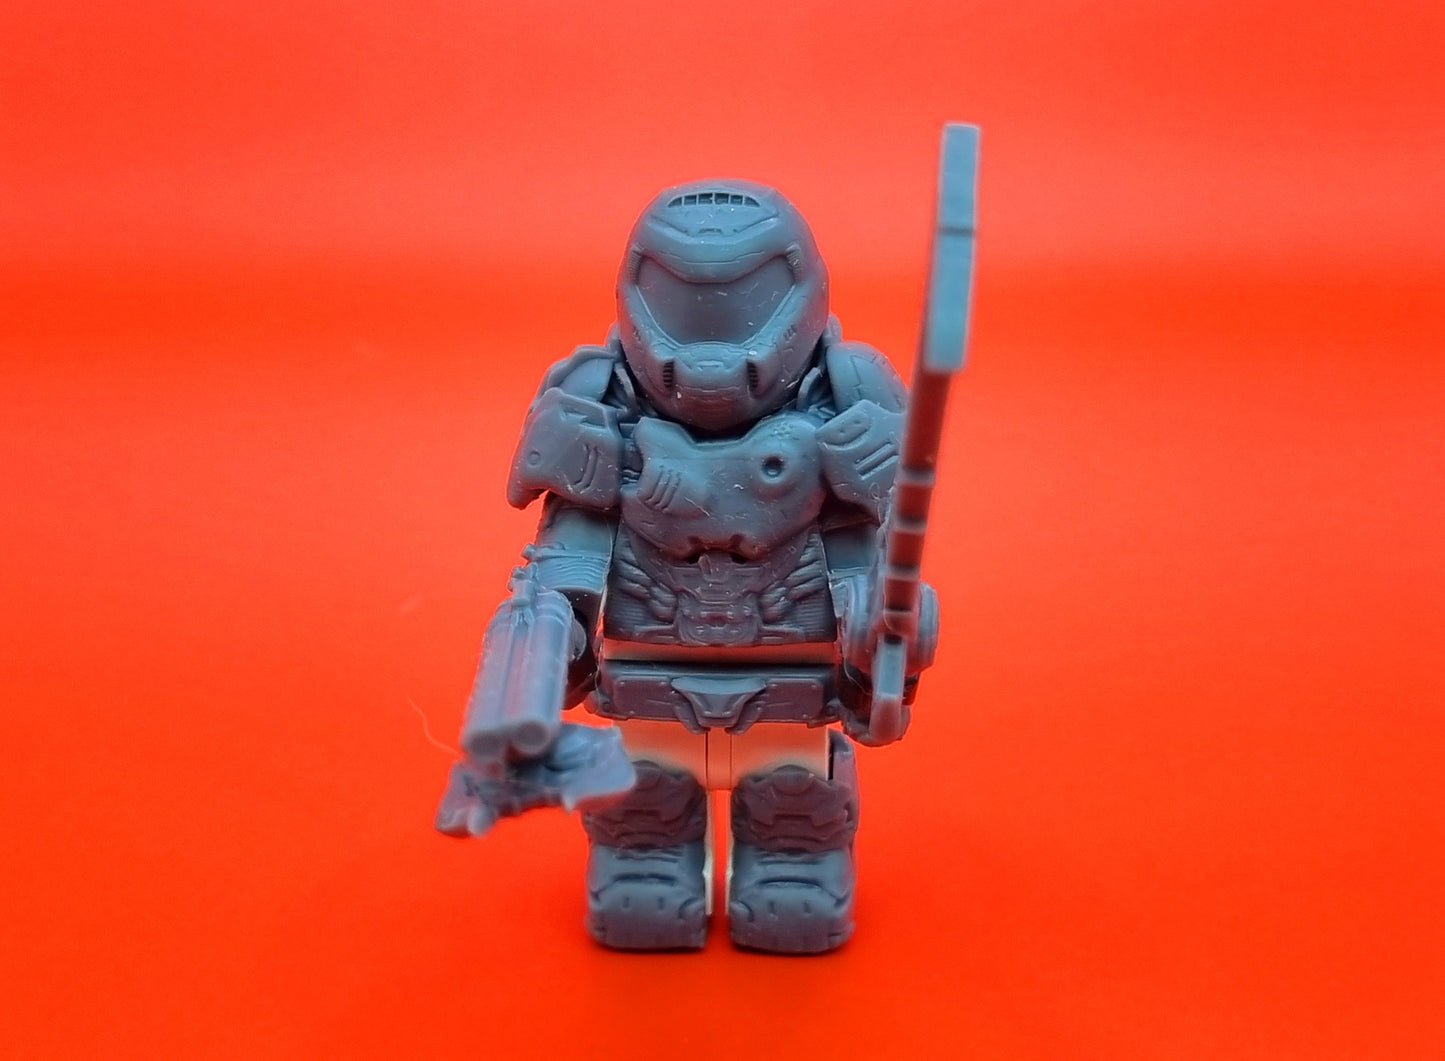 Building toy custom 3D printed game slayer!